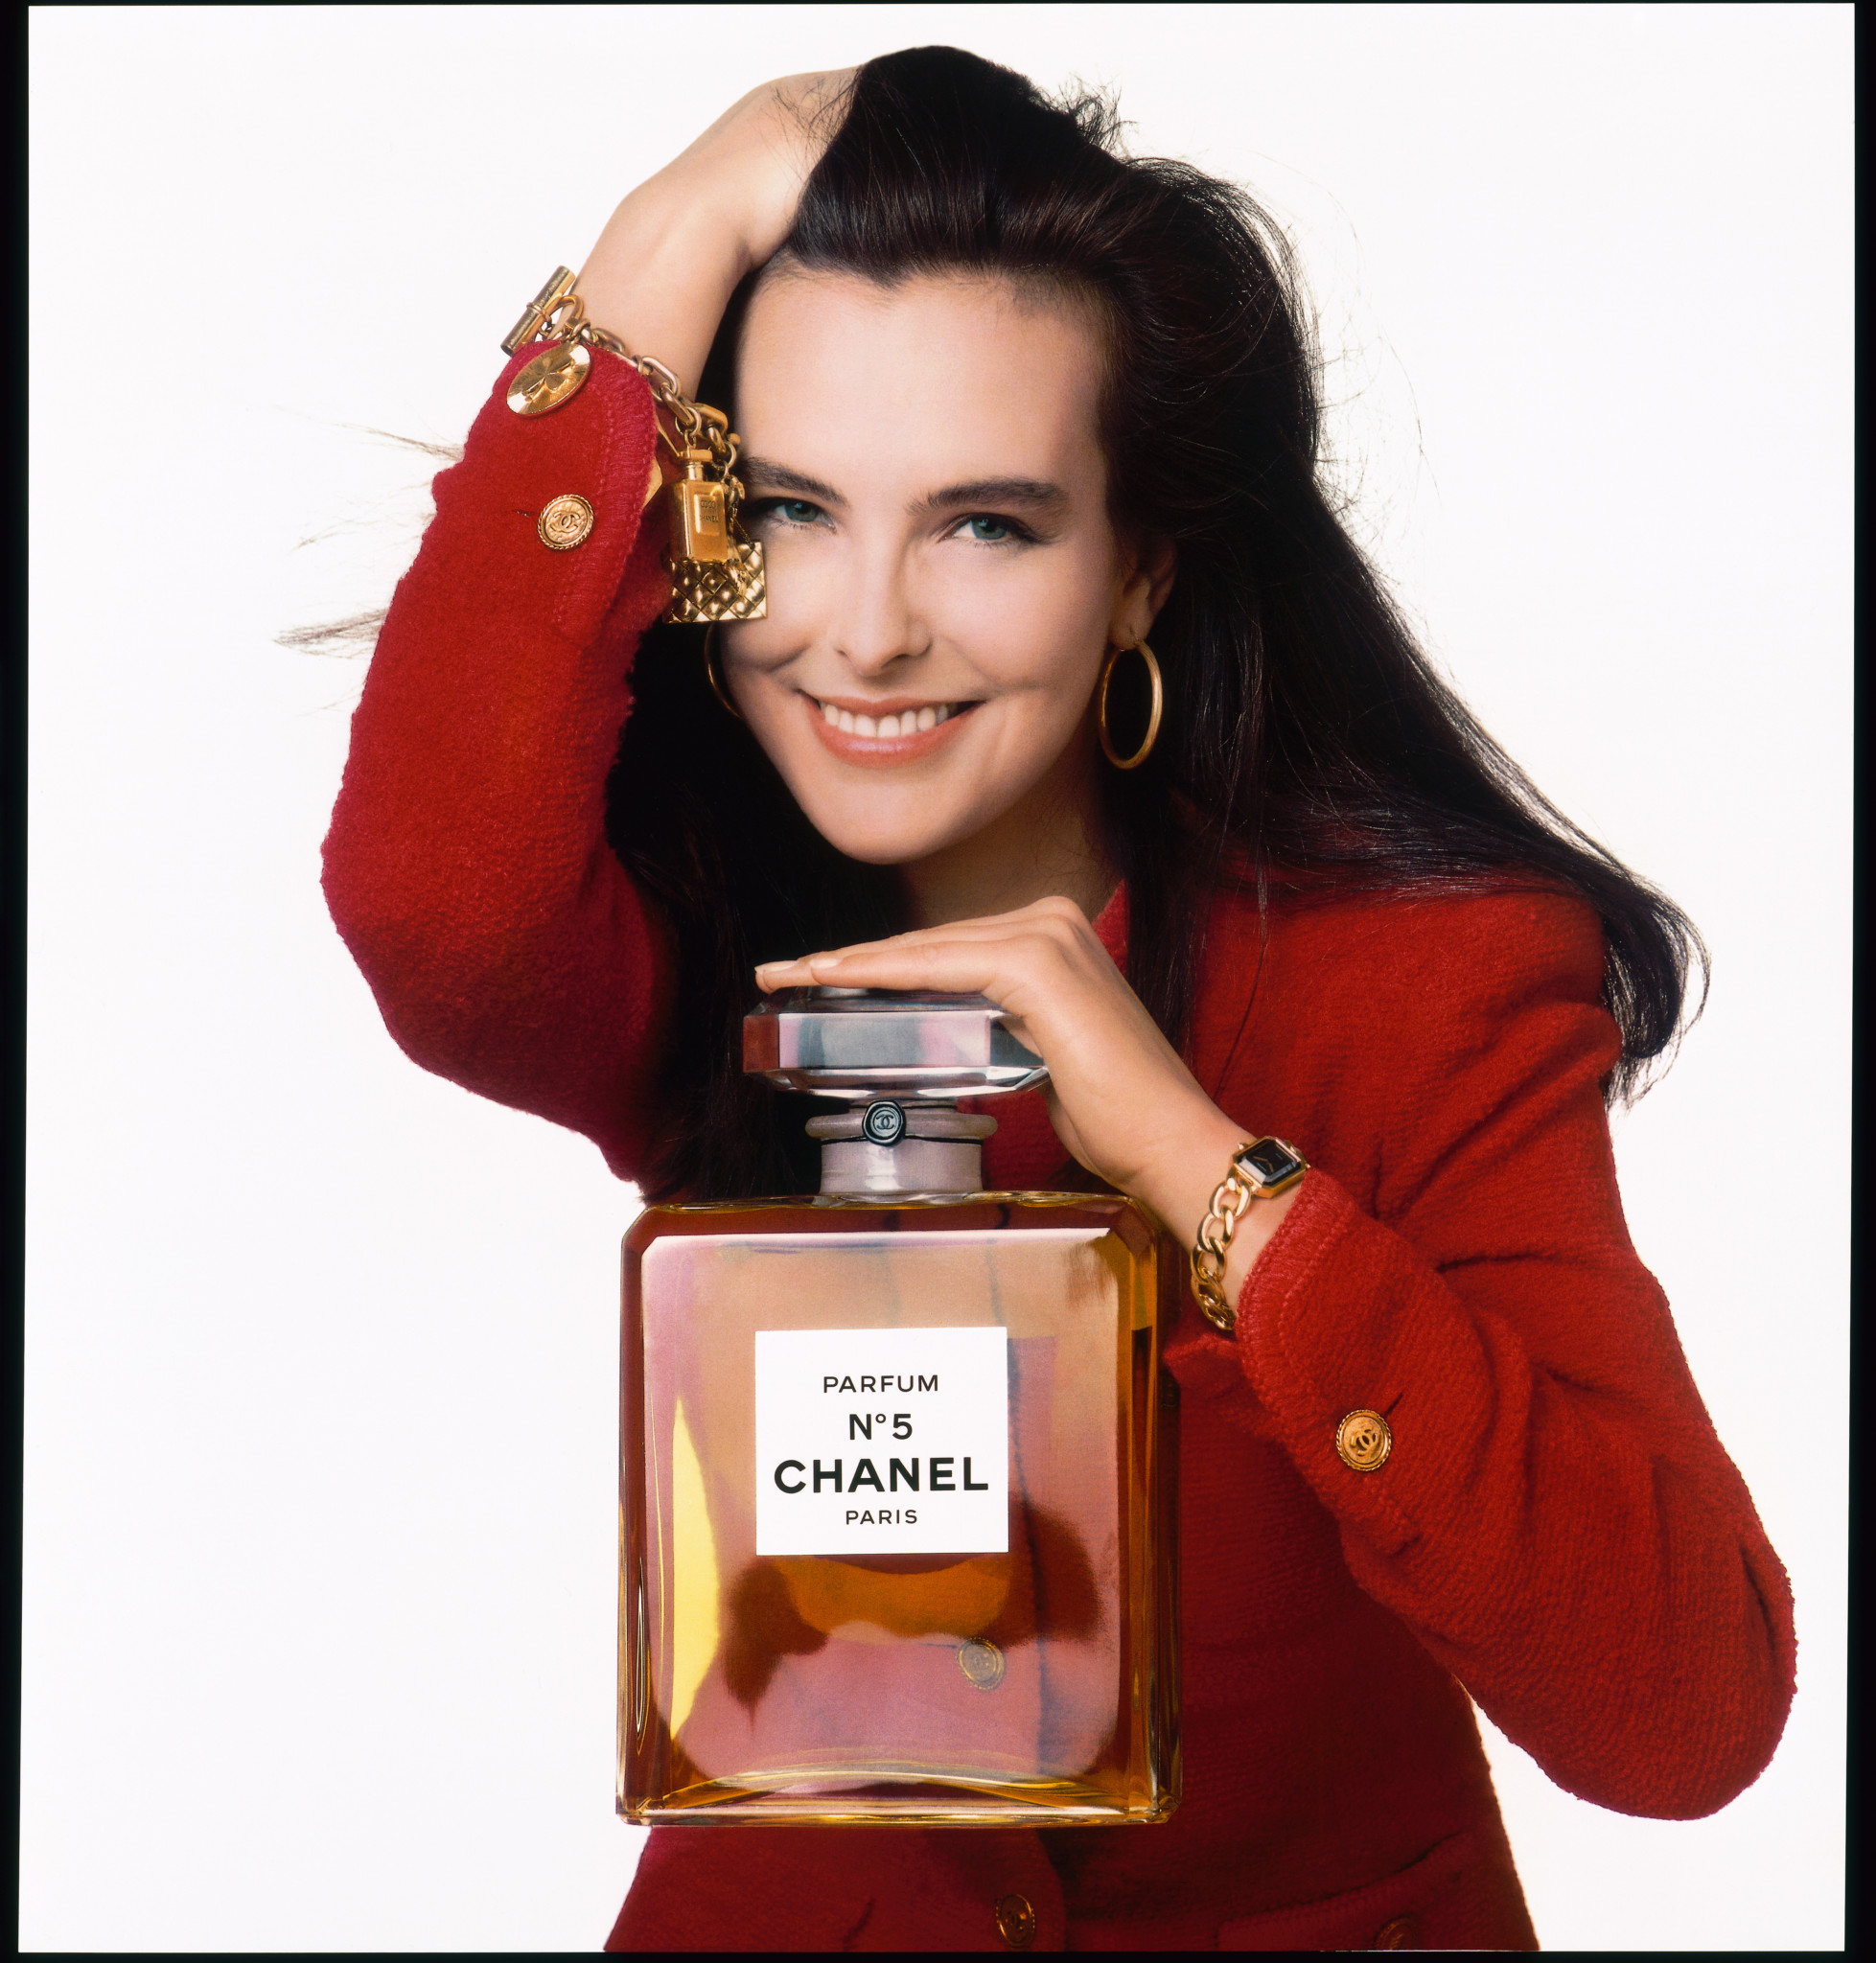 The original chanel premiere, launched with carole bouquet, in 1989.